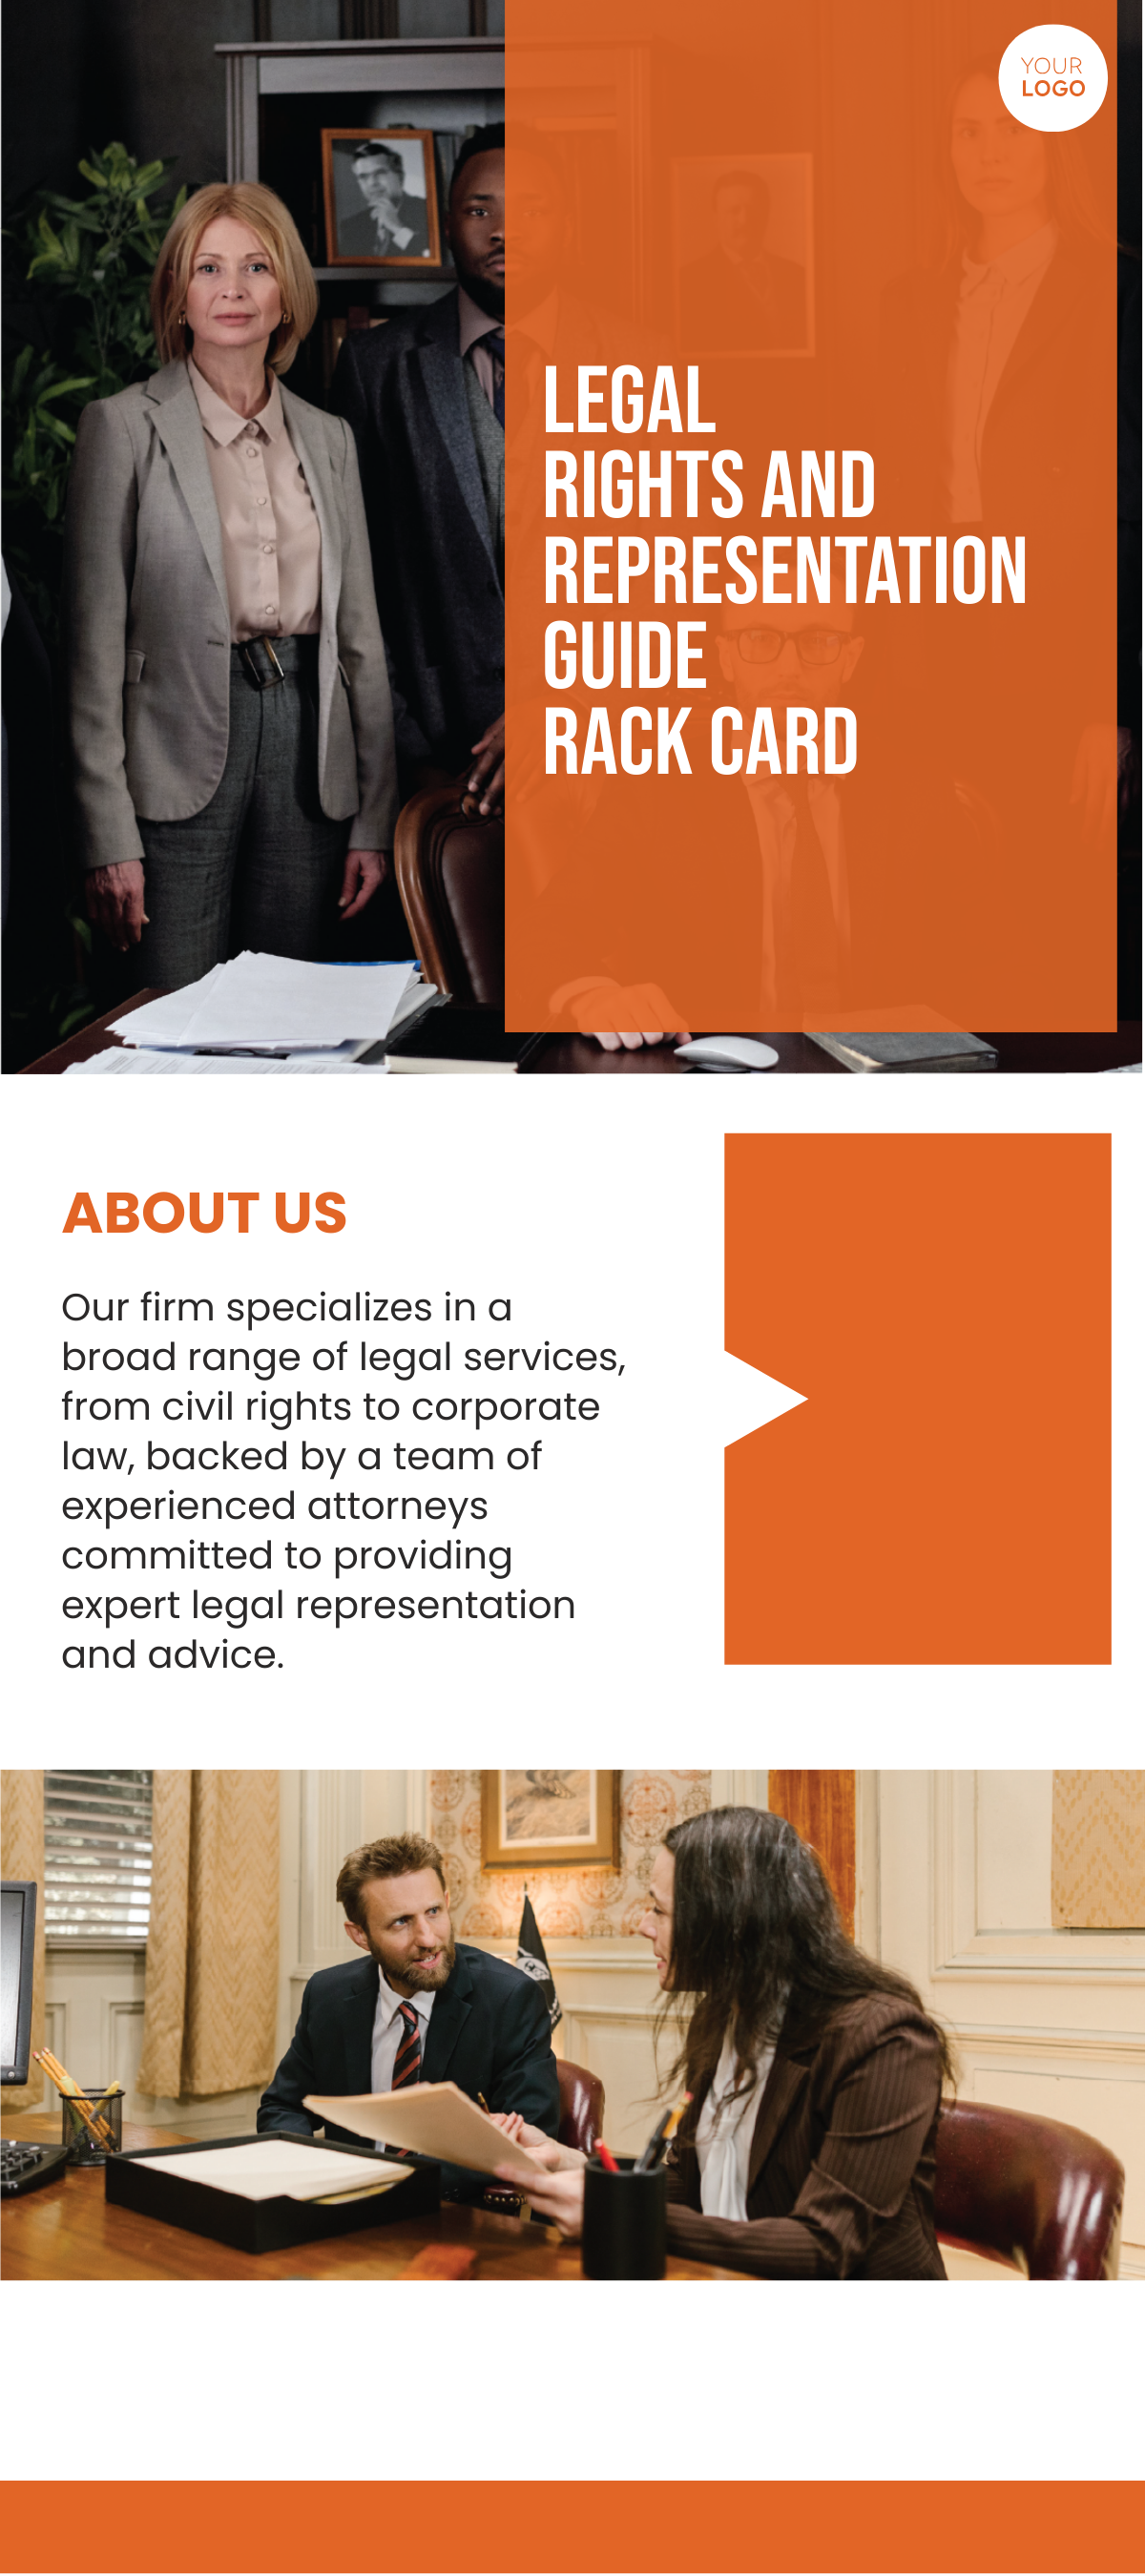 Legal Rights and Representation Guide Rack Card